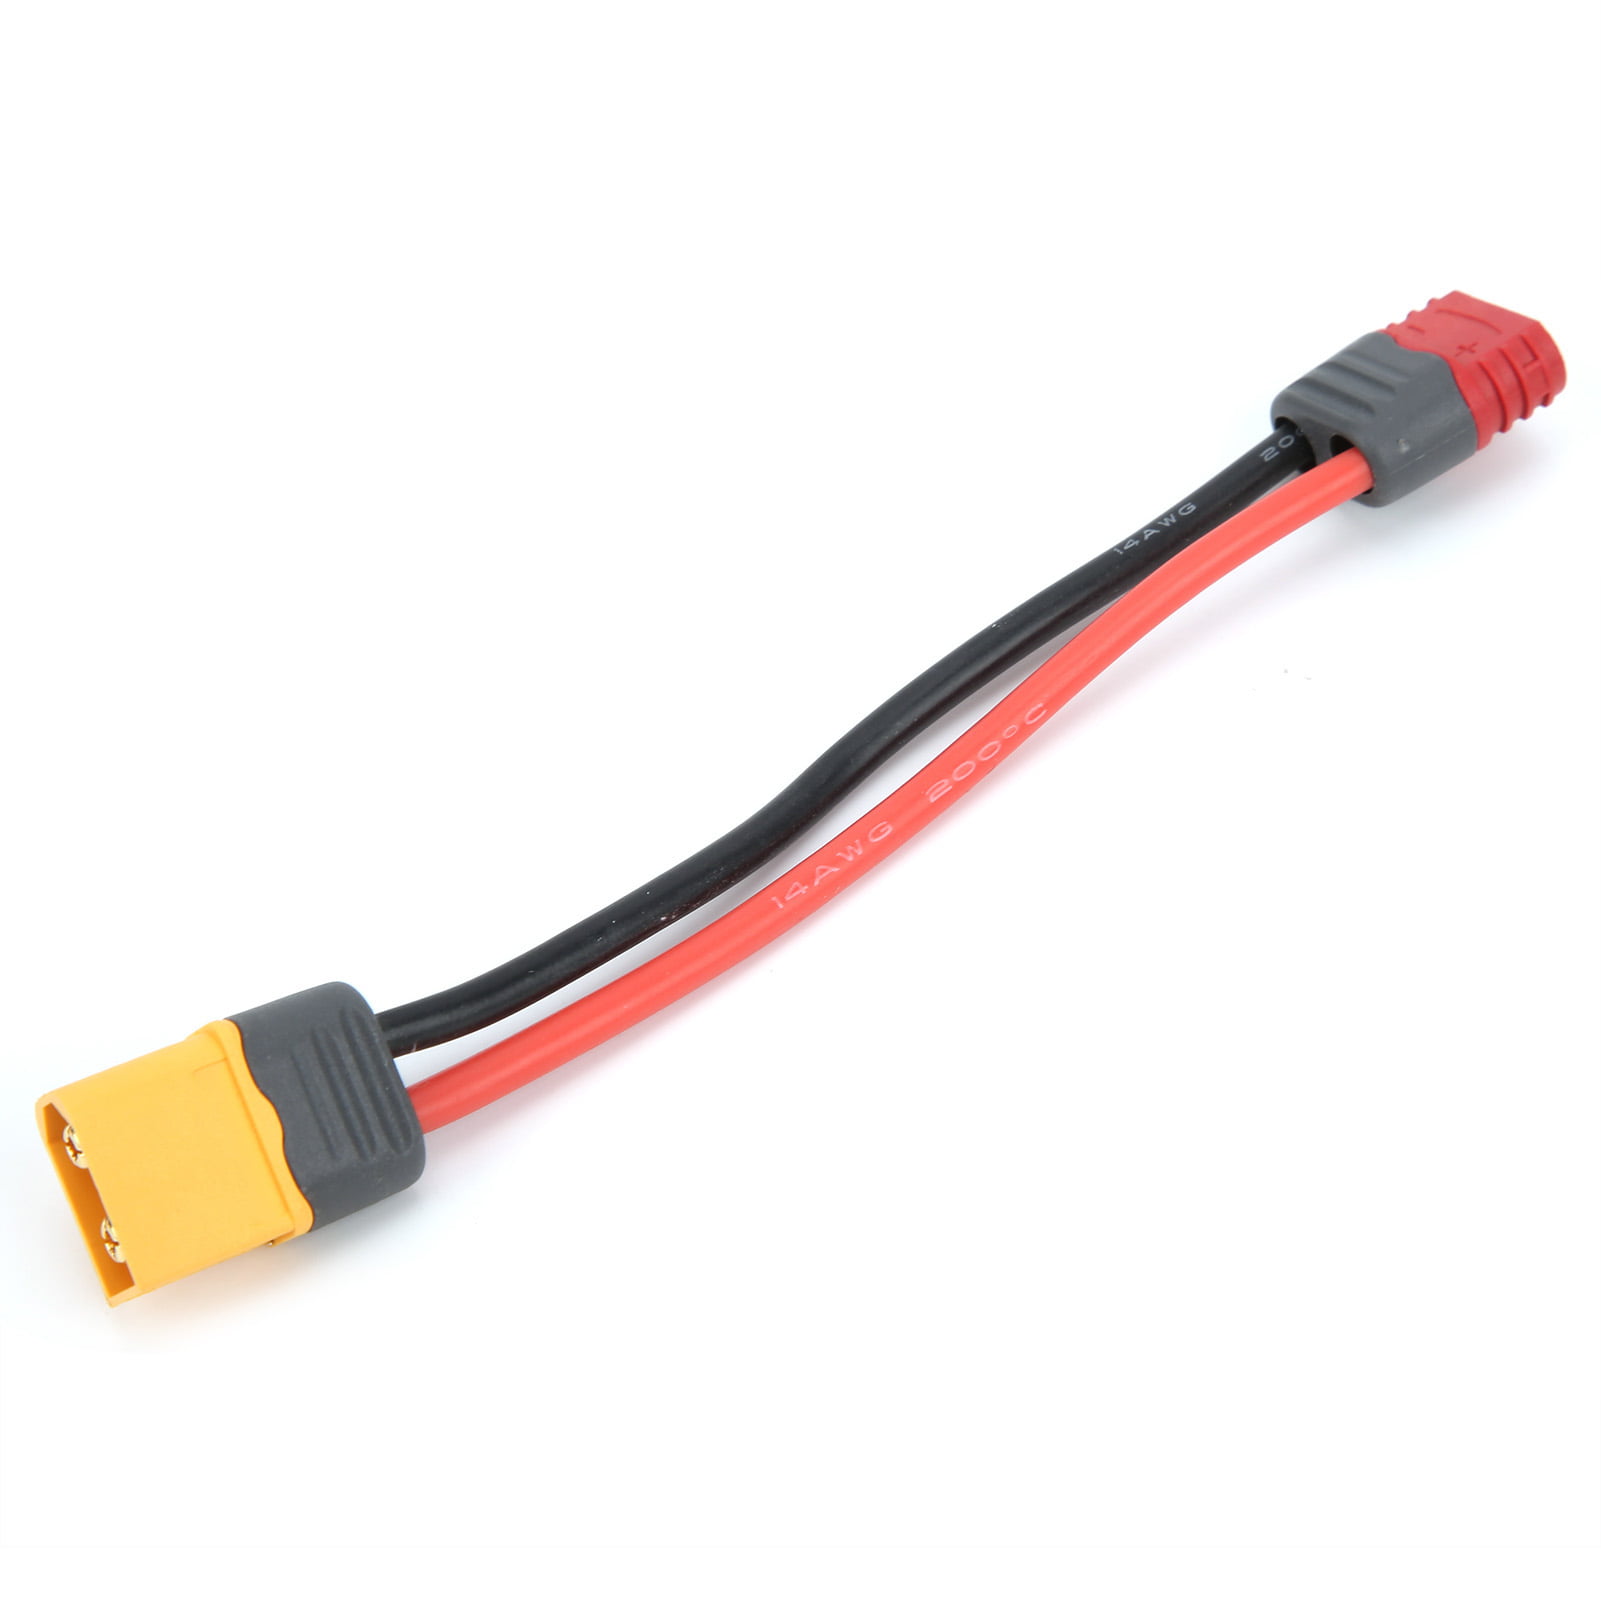 1x XT60 Female To Male T Connectors Adapters Lipo Battery Plug Wiring Useful